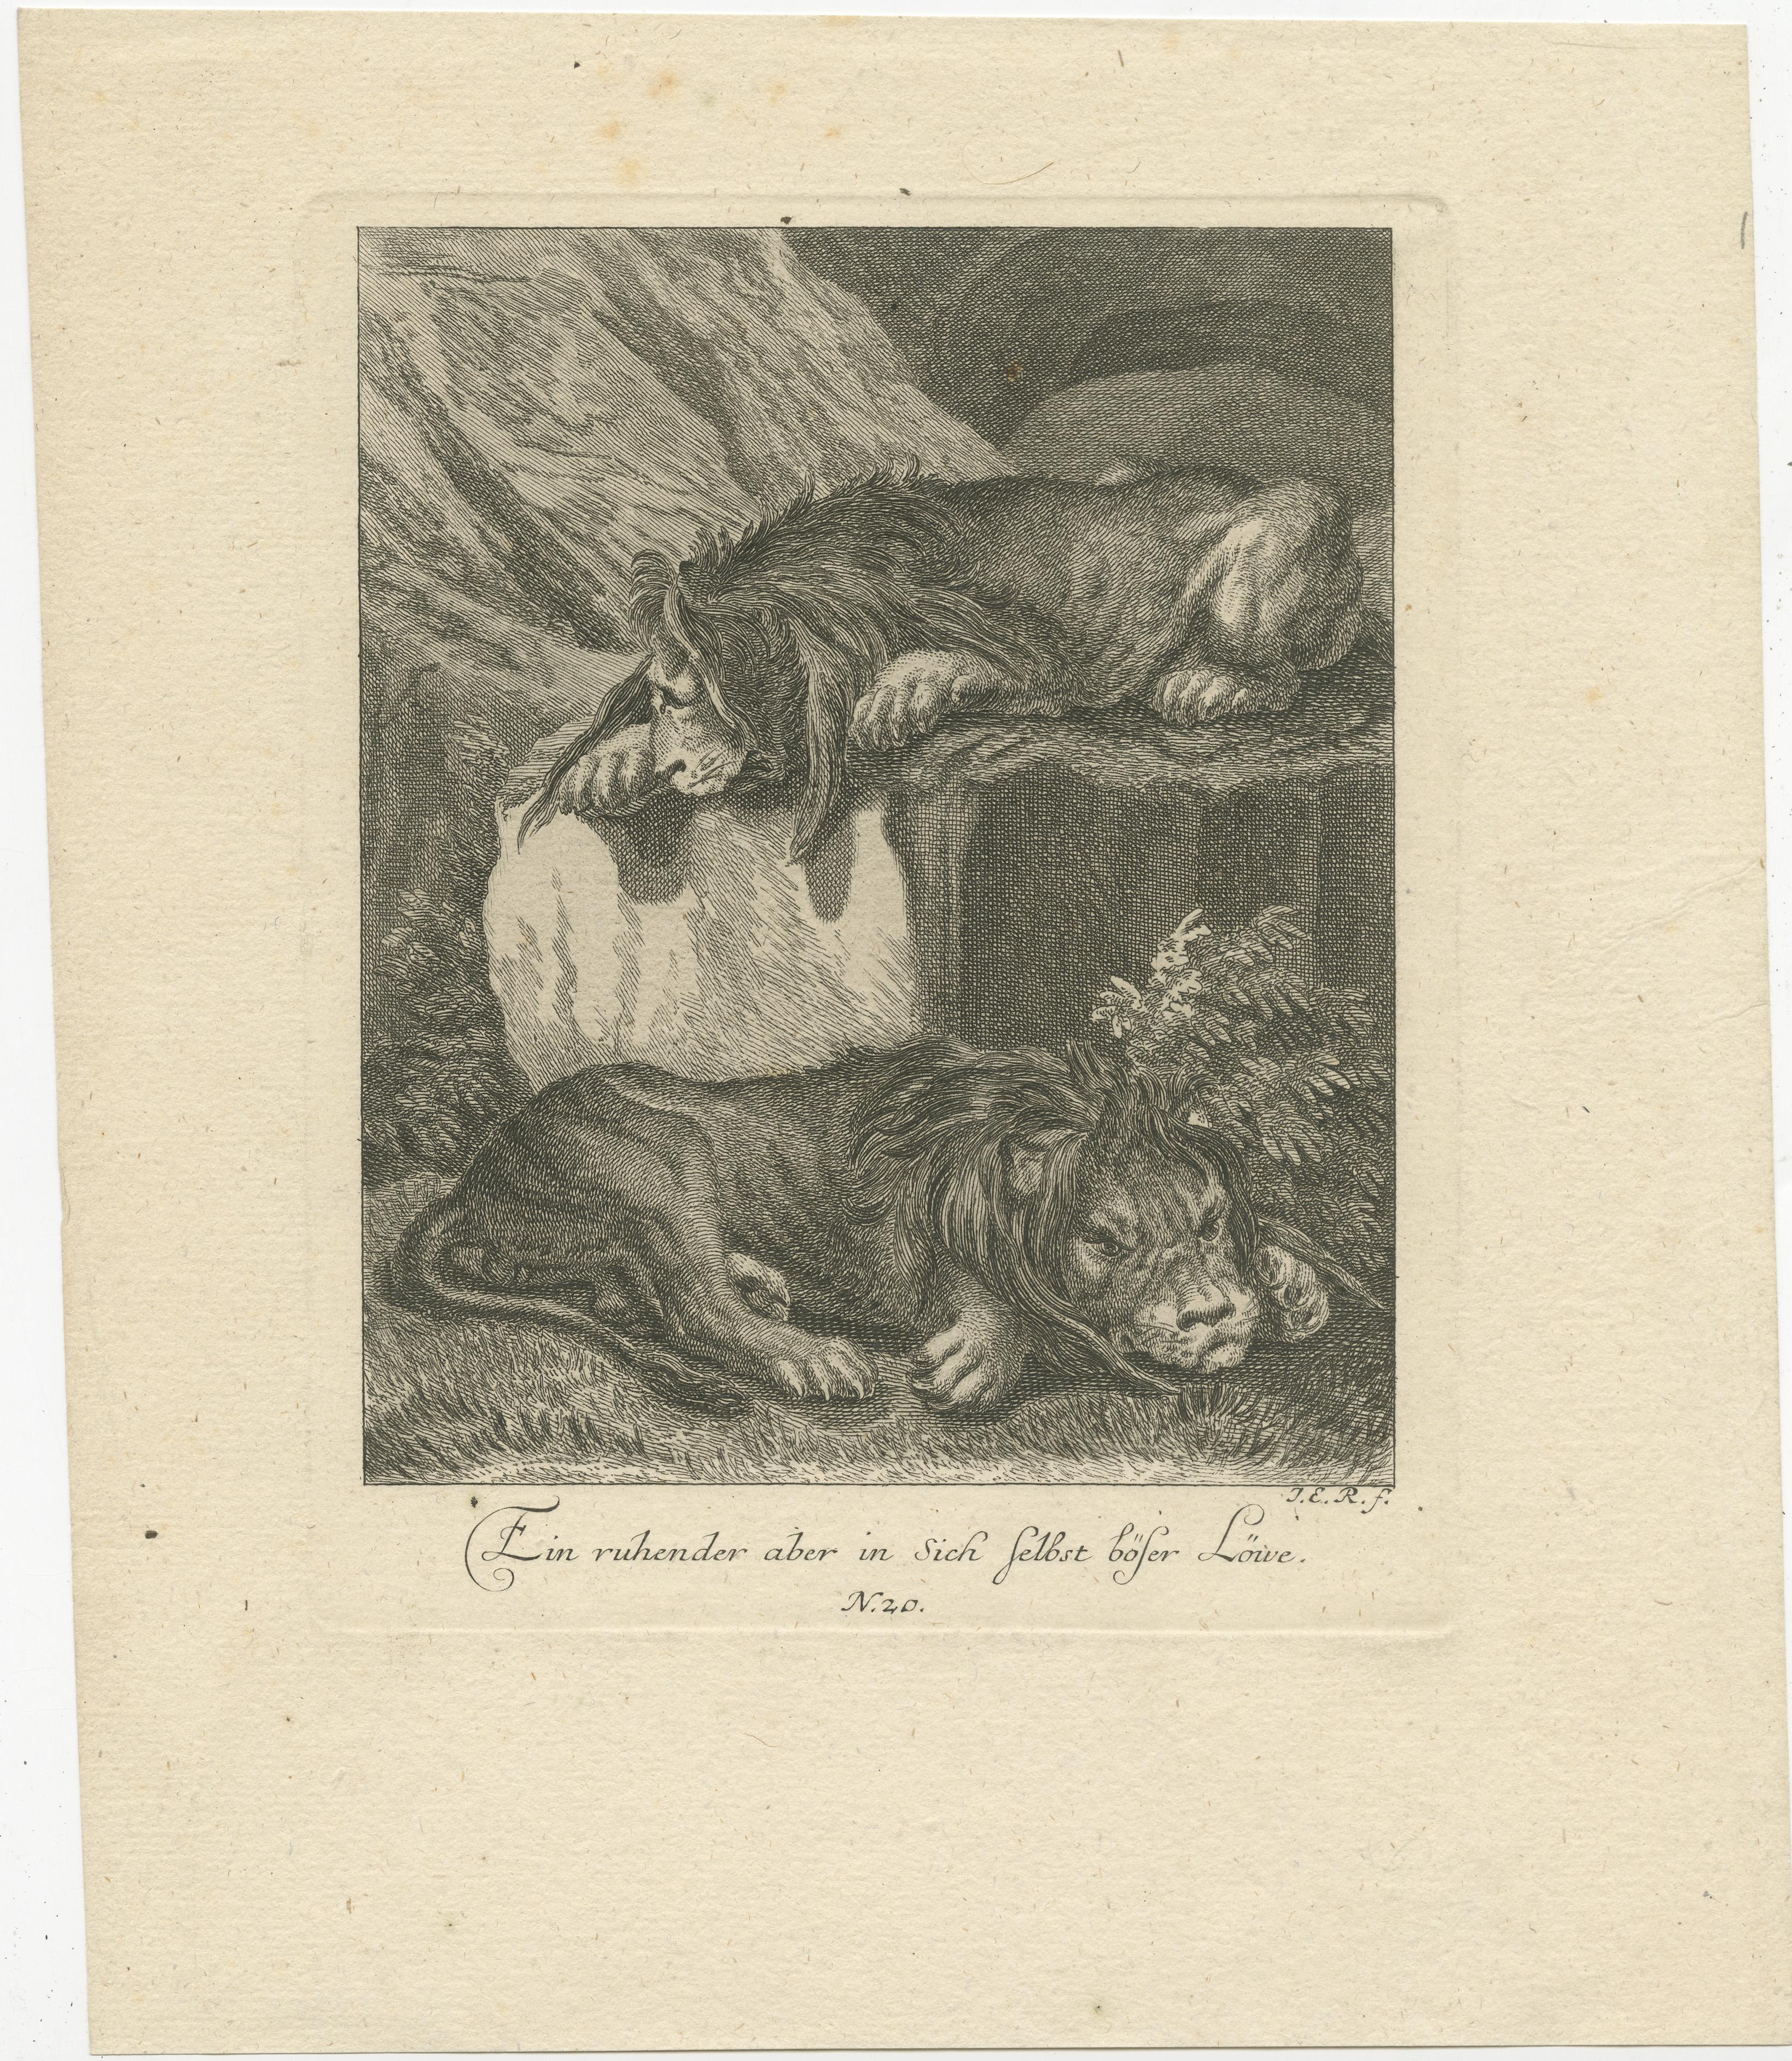 Antique print titled 'Ein ruhender aber in sich selbst böser Löwe'. Old German print of two lions resting. This print originates from 'Entwurff einiger Thiere (..)' by J.E. Ridinger, published 1738.